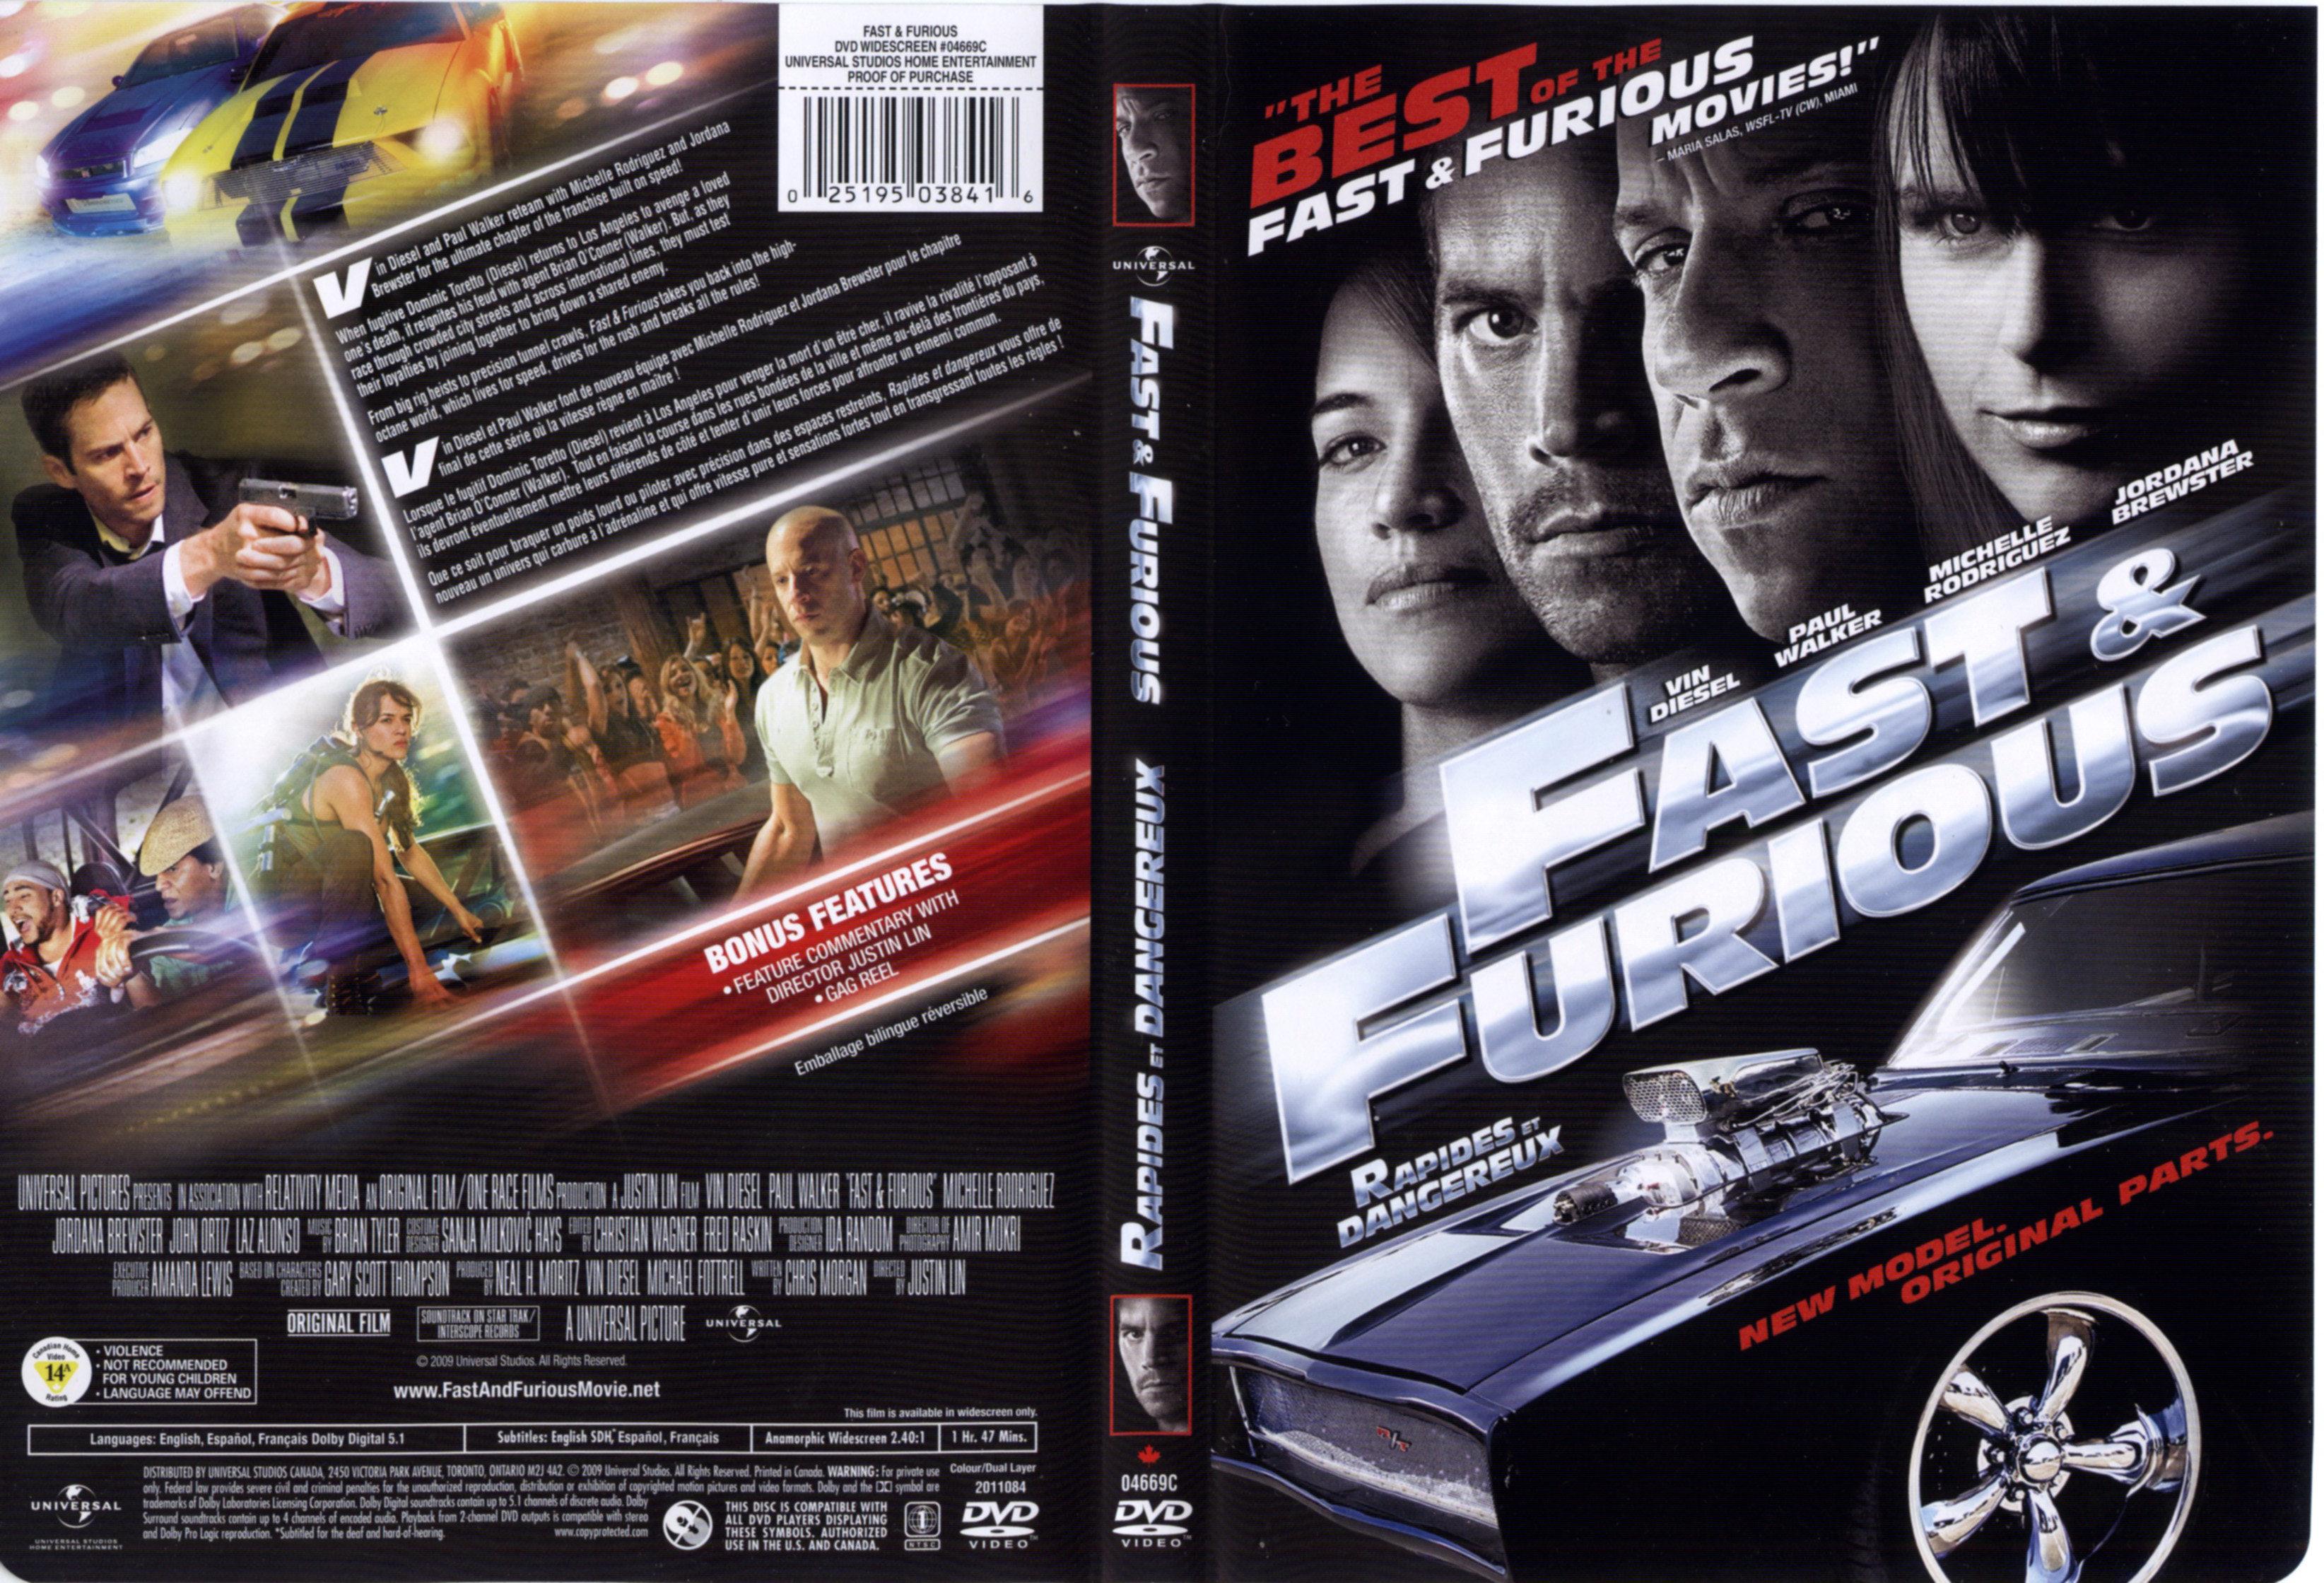 Jaquette DVD Fast and furious 4 (Canadienne)